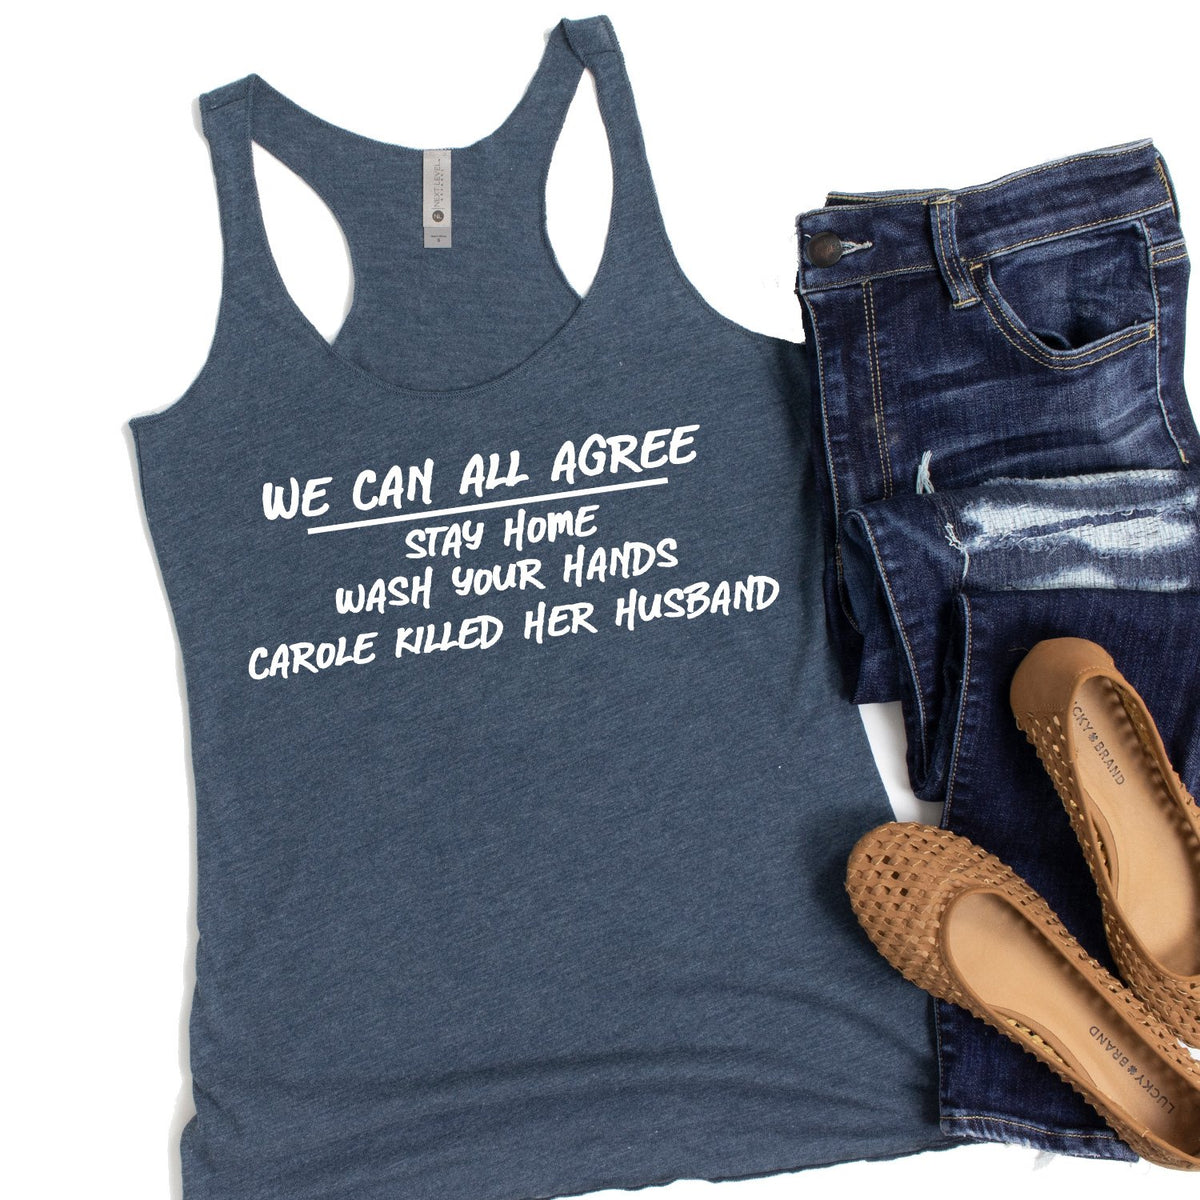 We Can All Agree Stay Home Carole Killed Her Husband - Tank Top Racerback